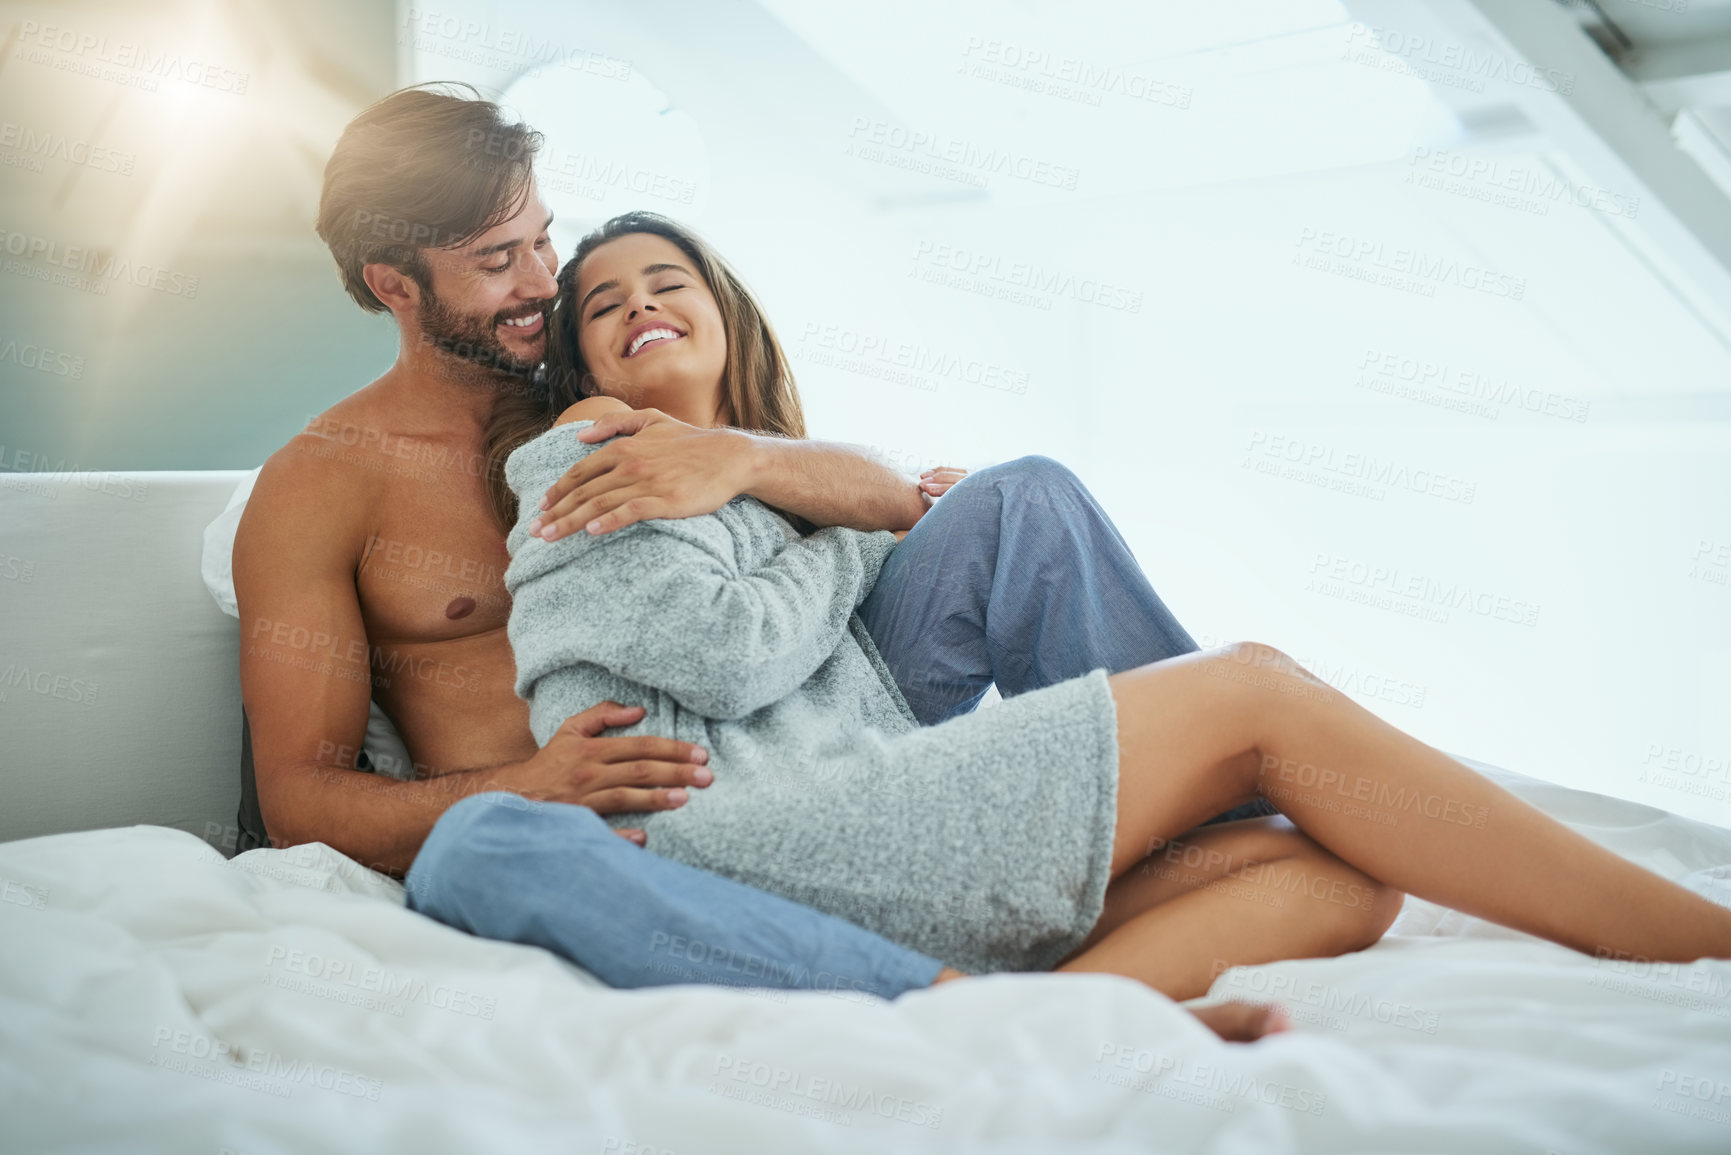 Buy stock photo Shot of an affectionate young couple sharing an intimate moment in bed